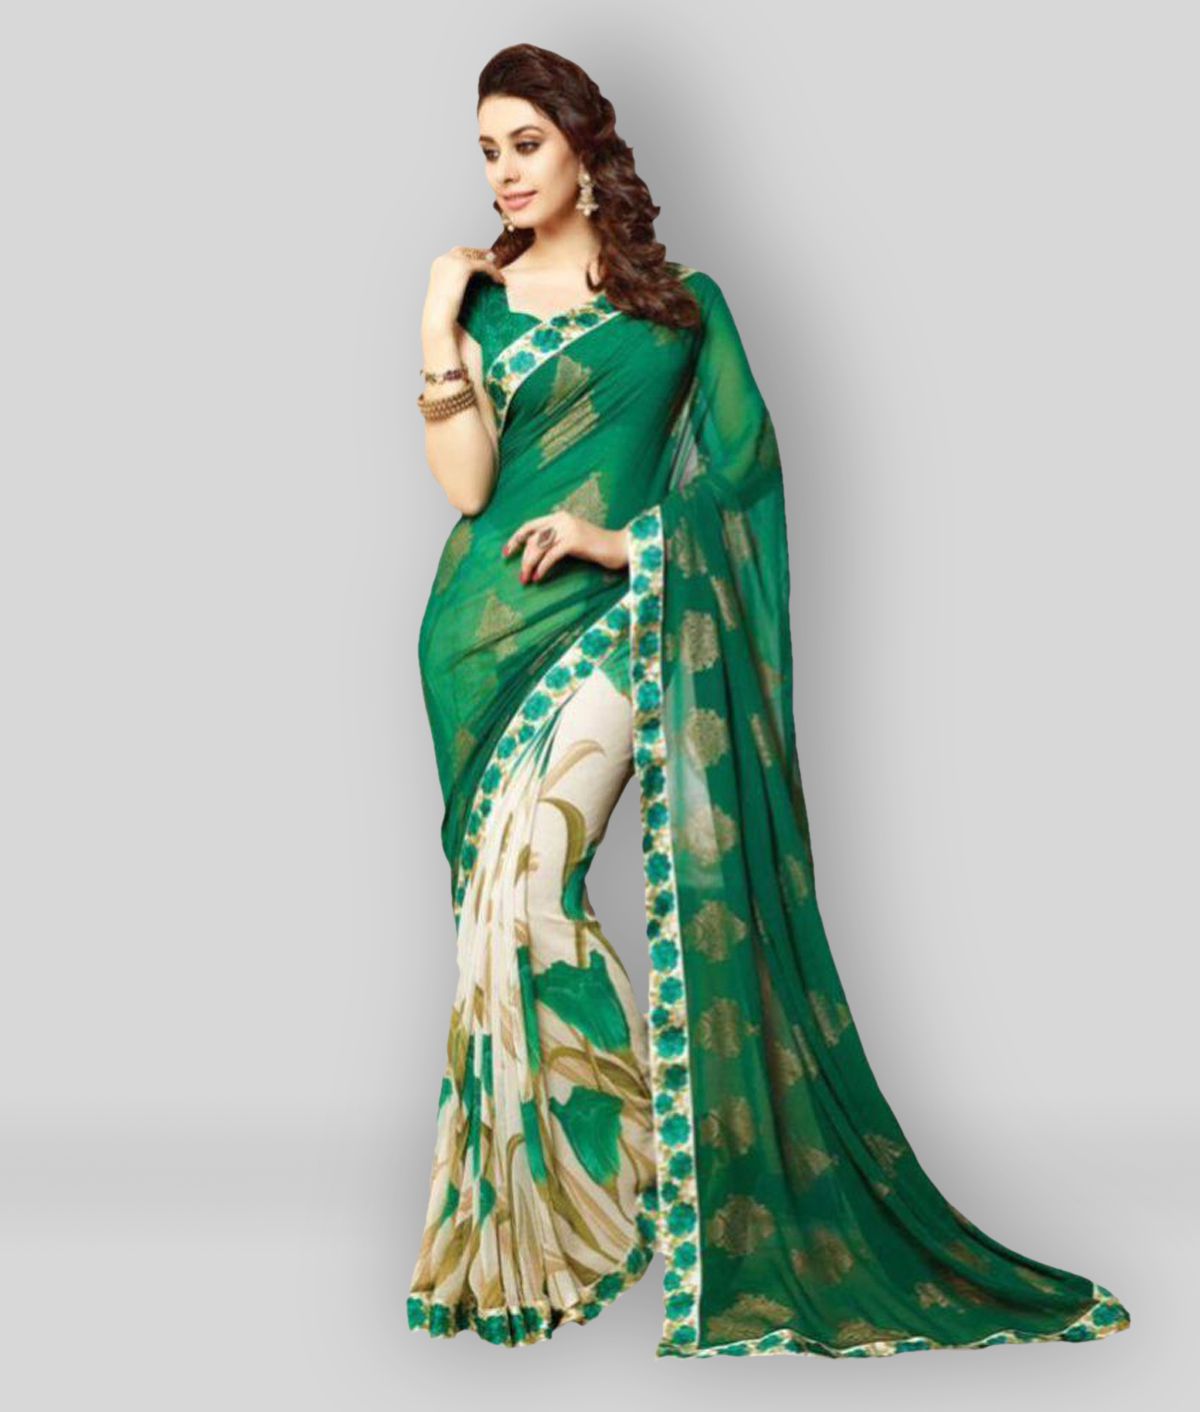     			Gazal Fashions - Multicolor Chiffon Saree With Blouse Piece ( Pack of 1 )